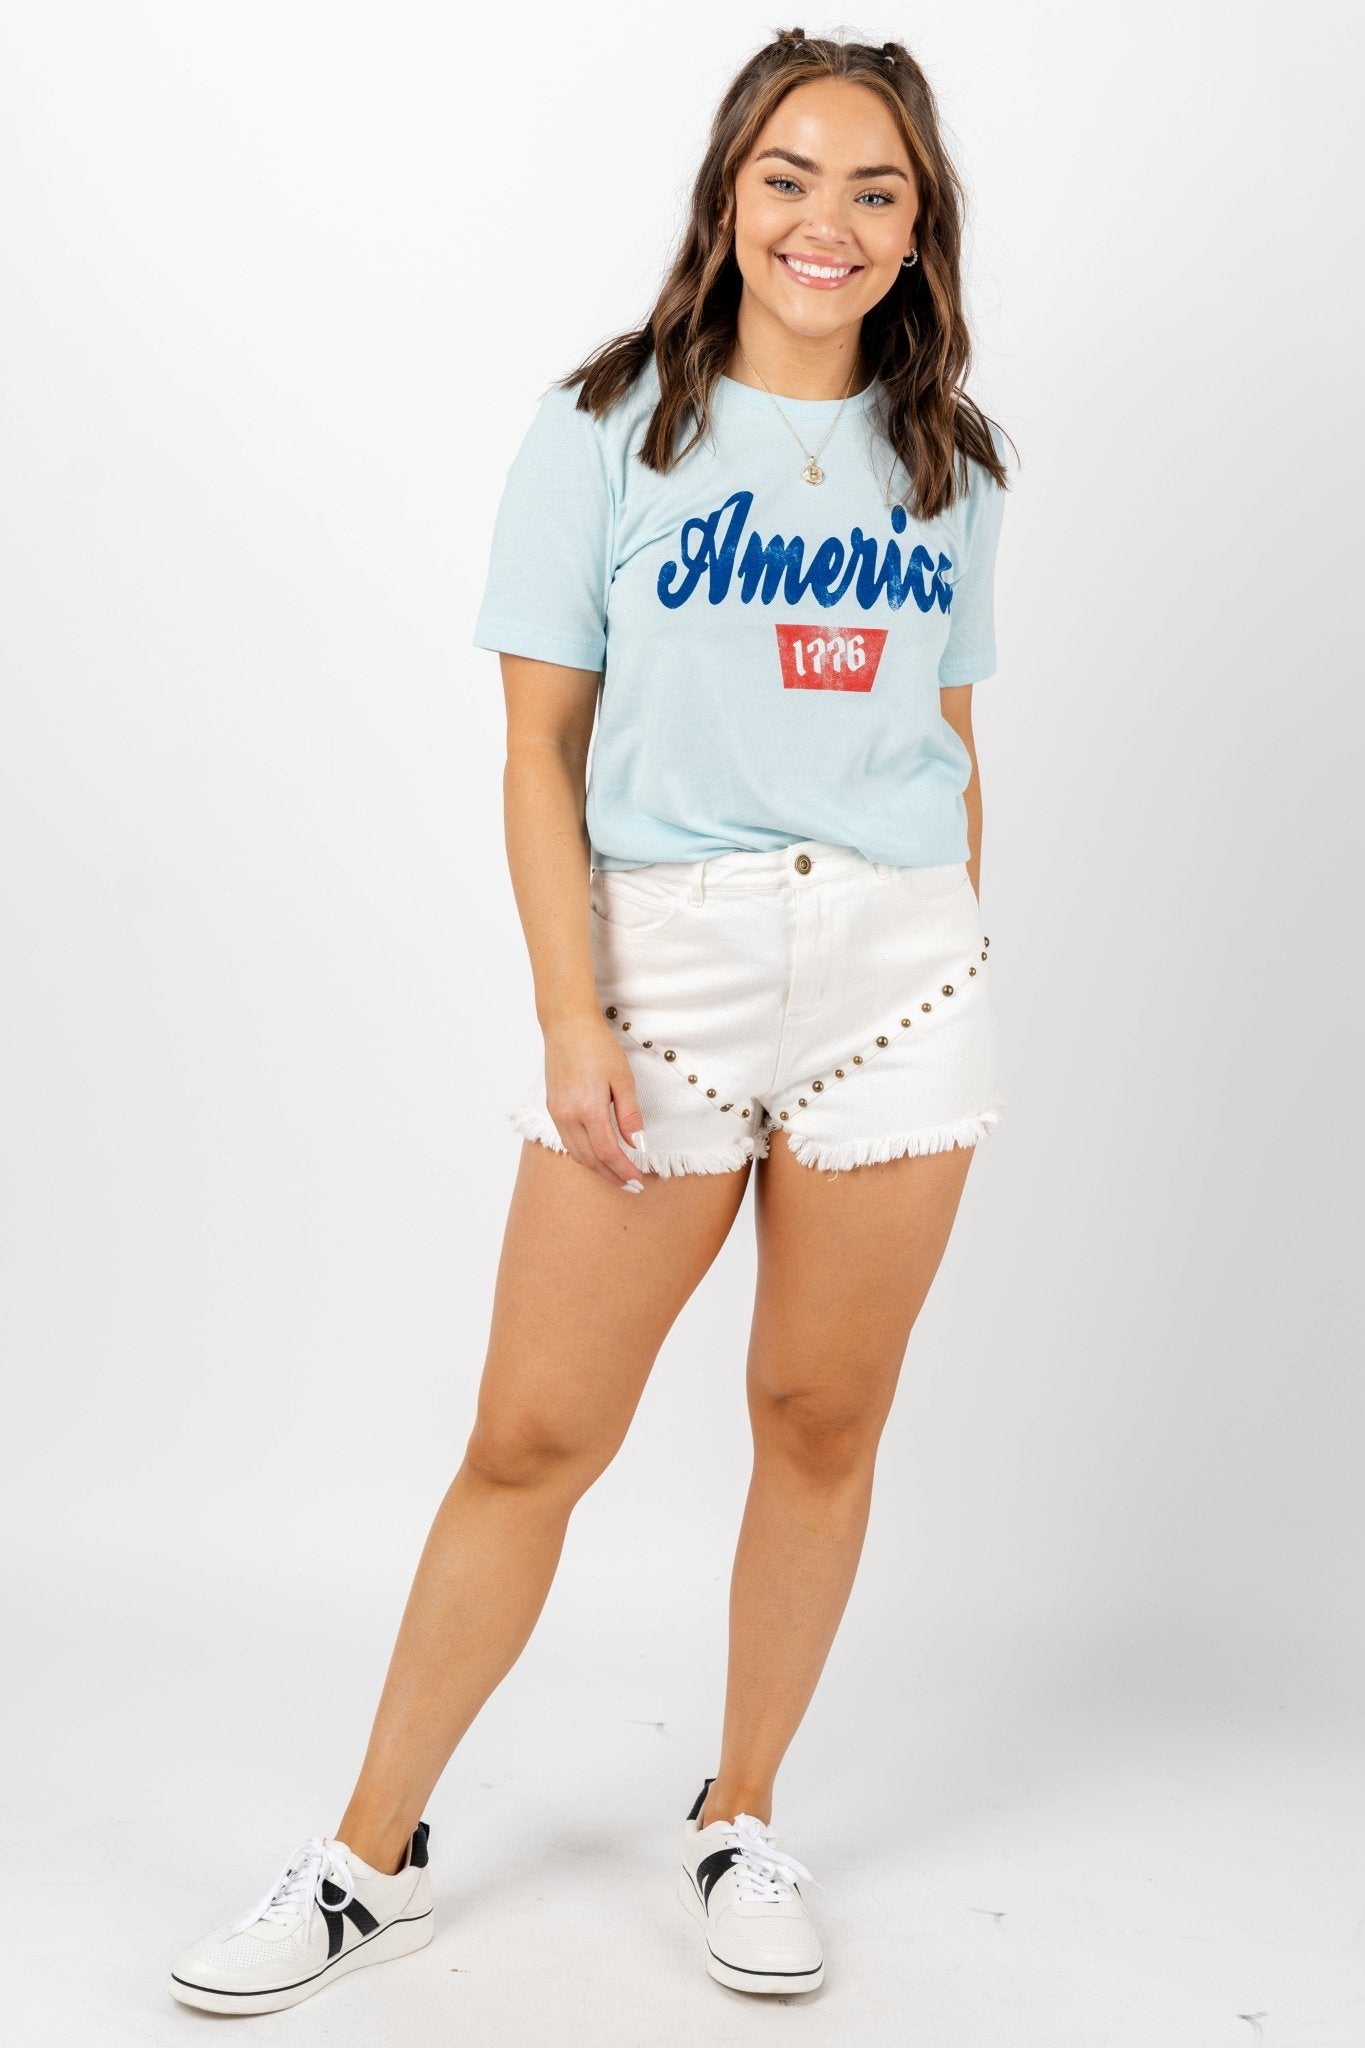 America Coors unisex t-shirt ice blue - Stylish T-shirts - Trendy American Summer Fashion at Lush Fashion Lounge Boutique in Oklahoma